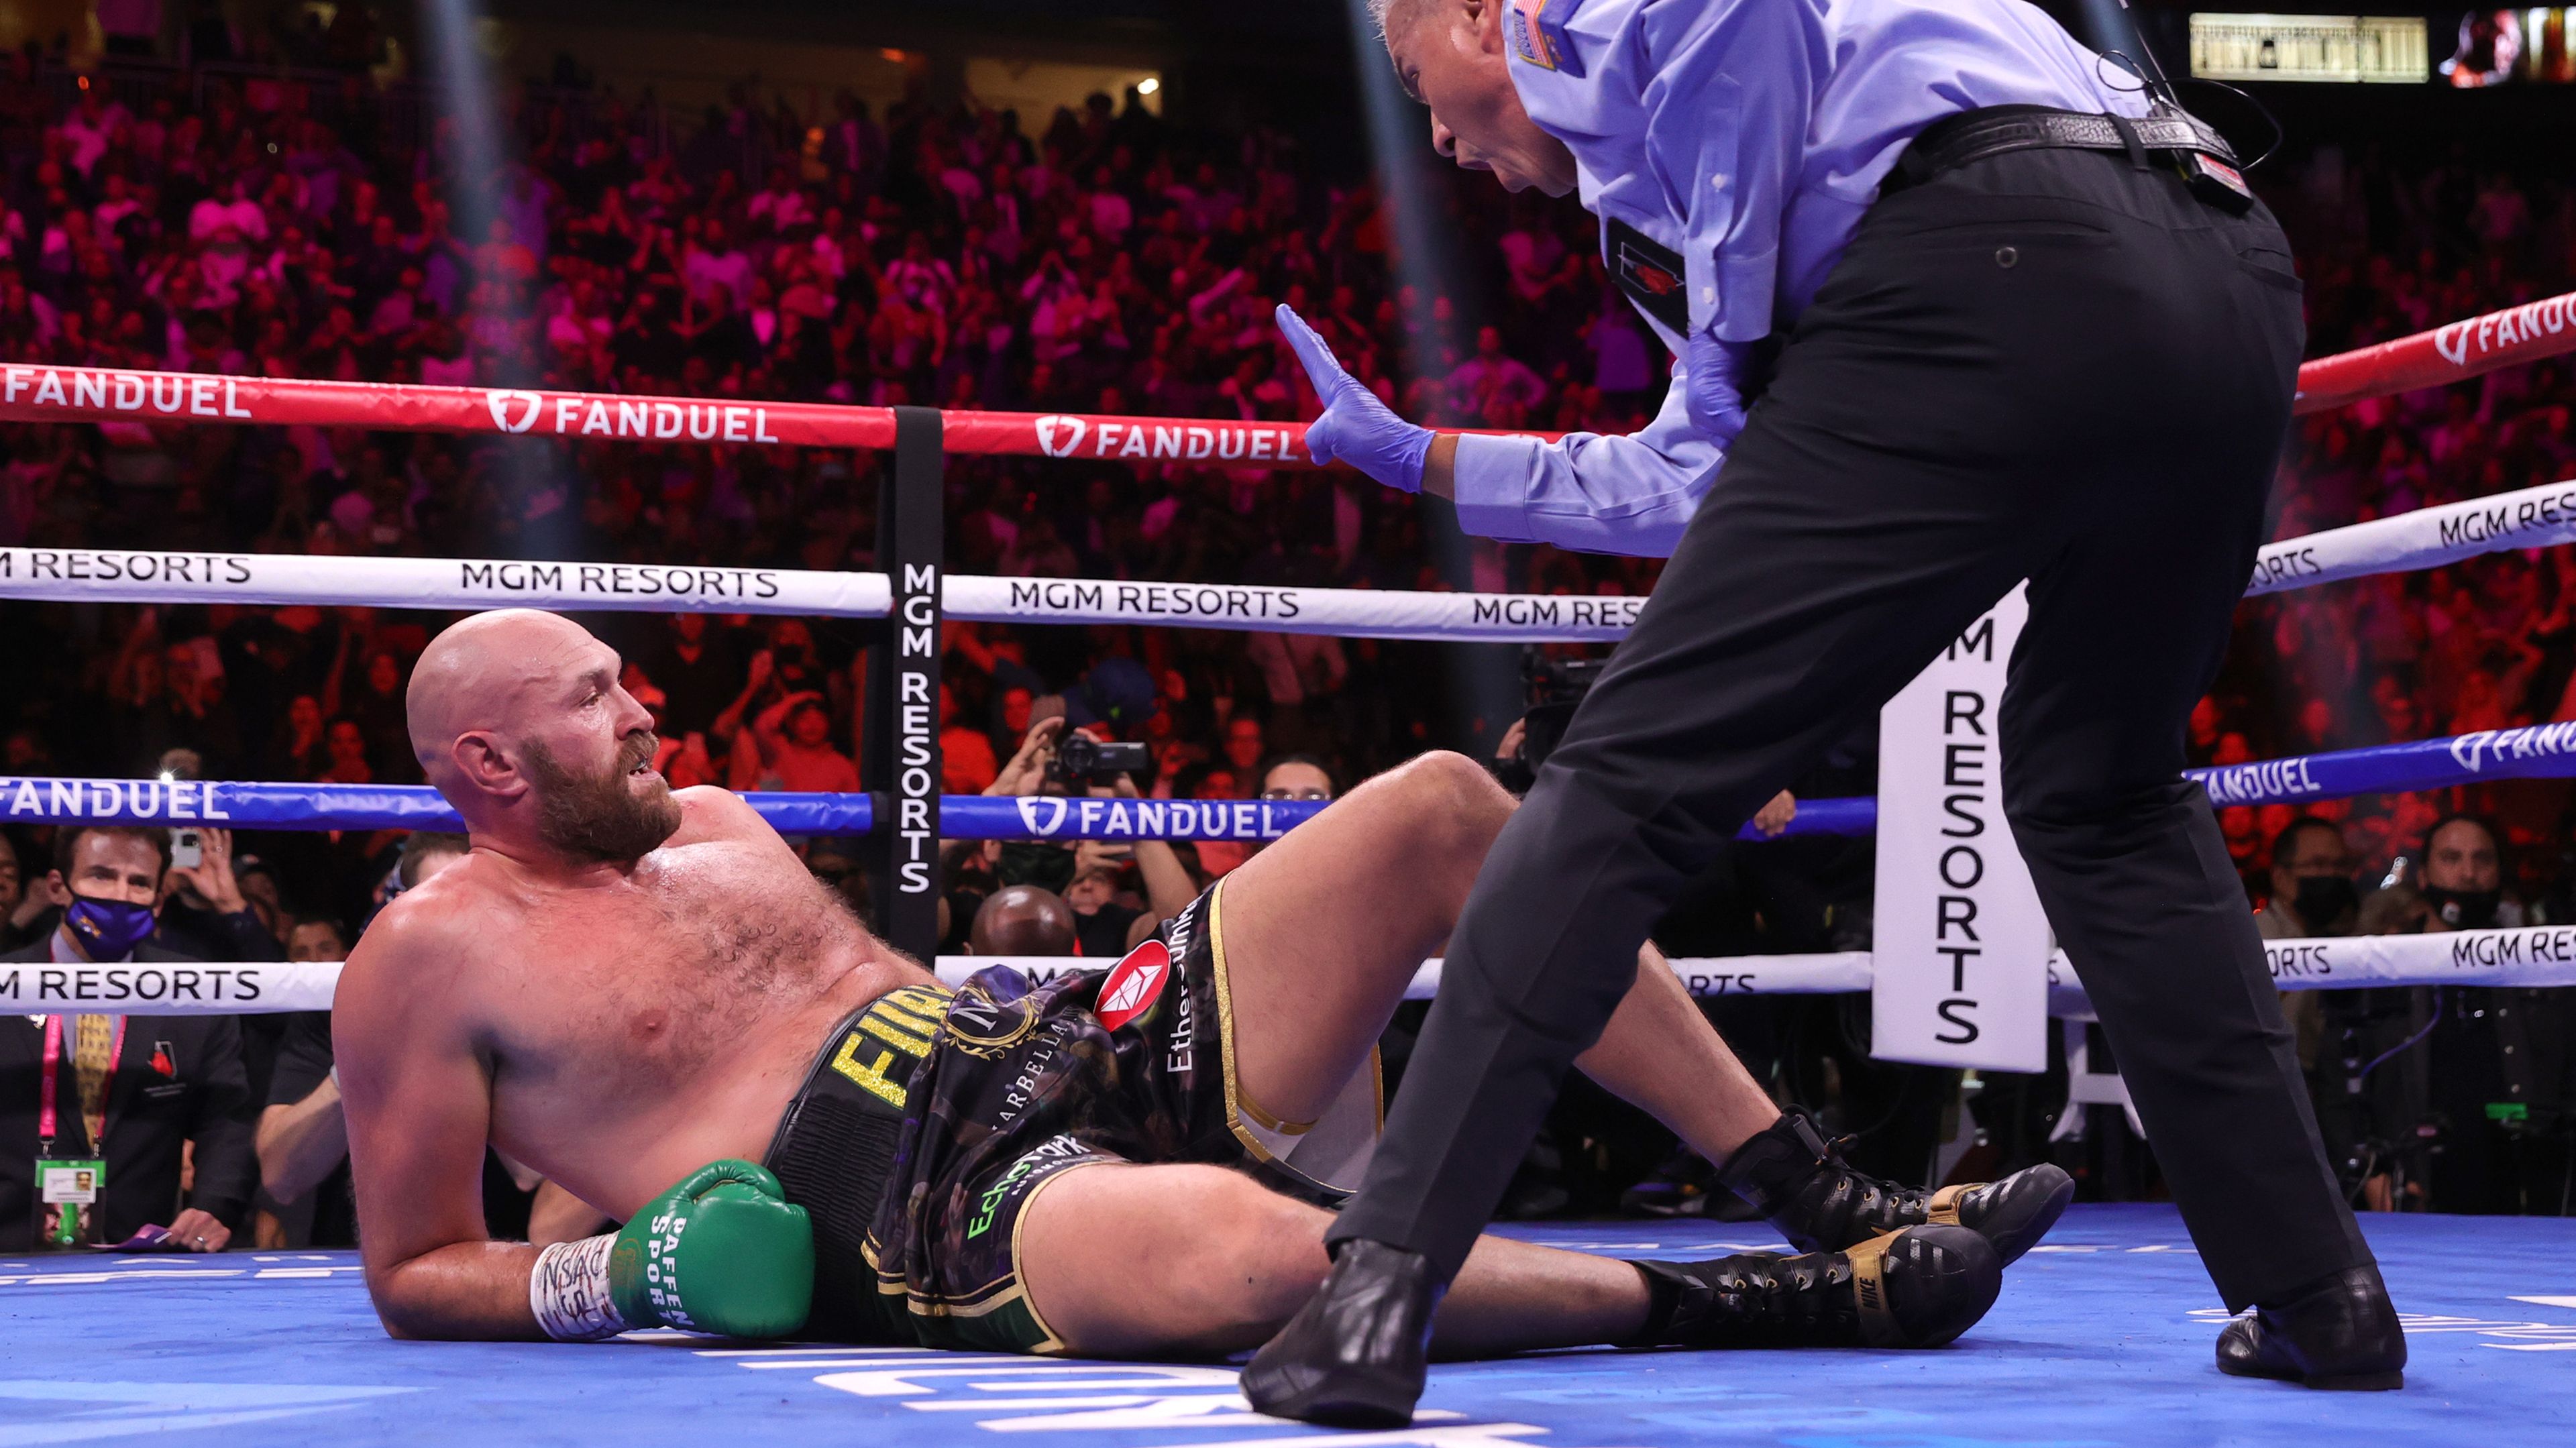 This is the moment some people reckon Tyson Fury should have lost the fight to Deontay Wilder.